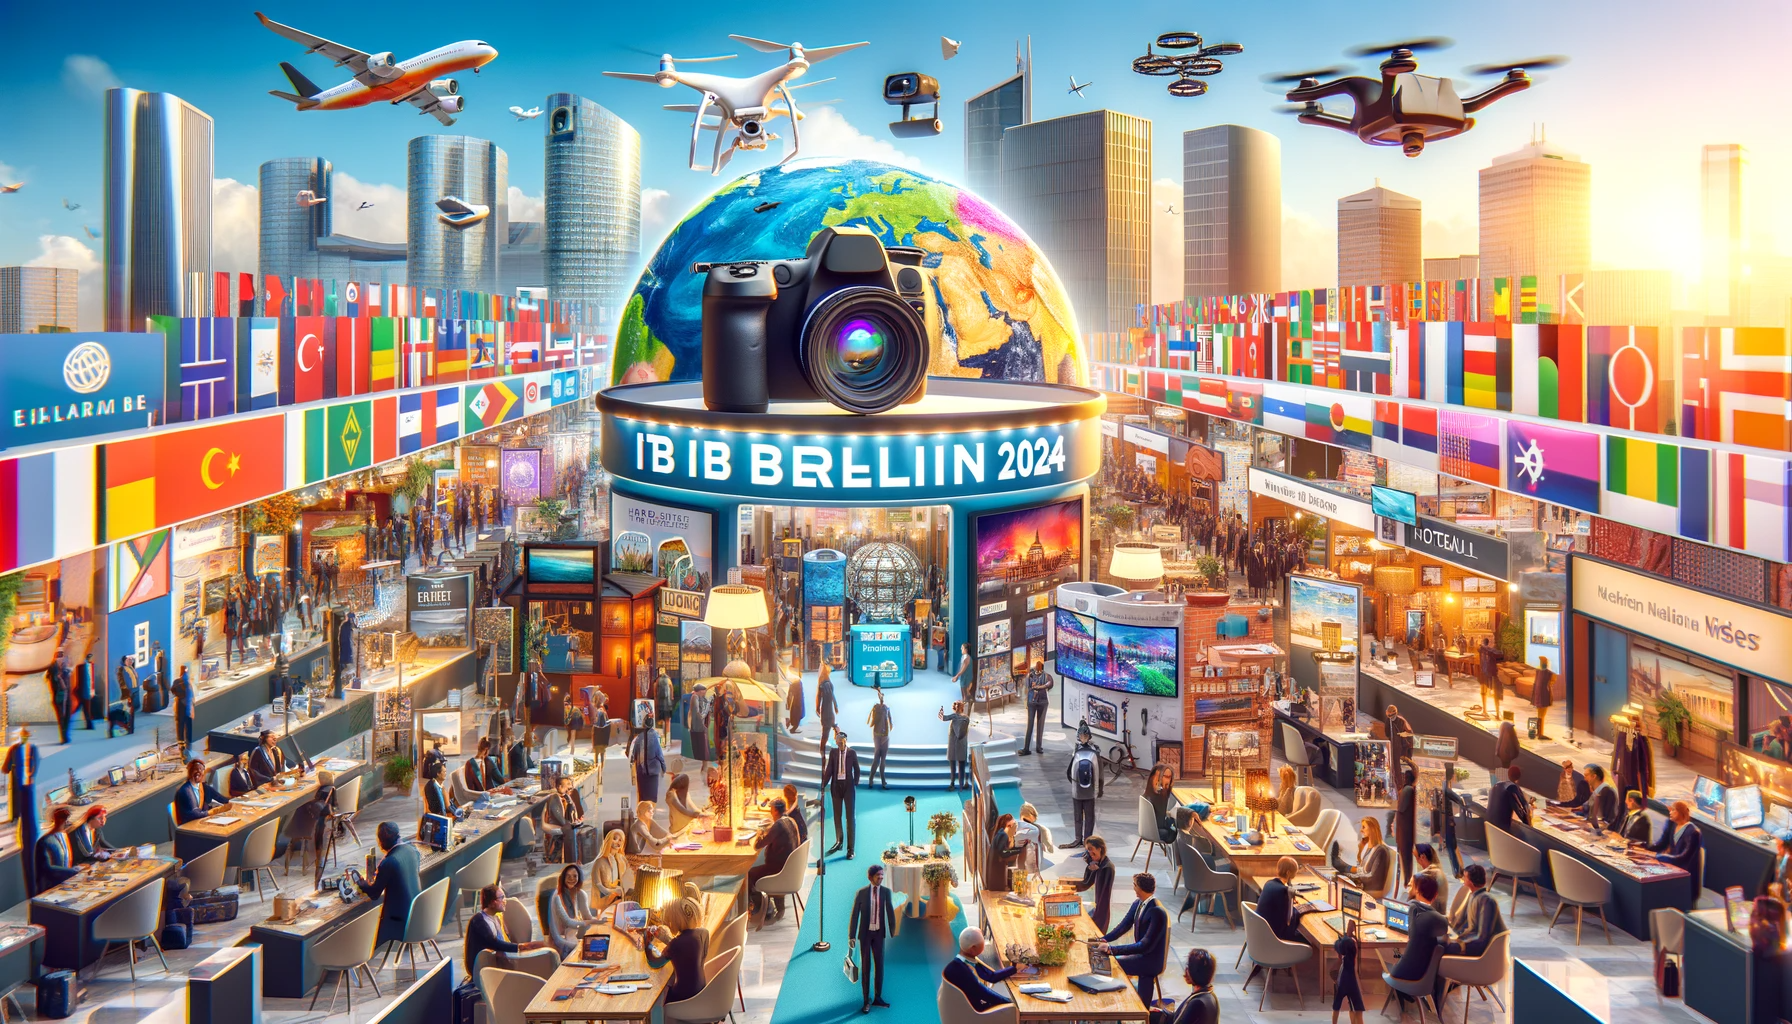 ITB Berlin 2024, showcasing a bustling trade show atmosphere with diverse booths